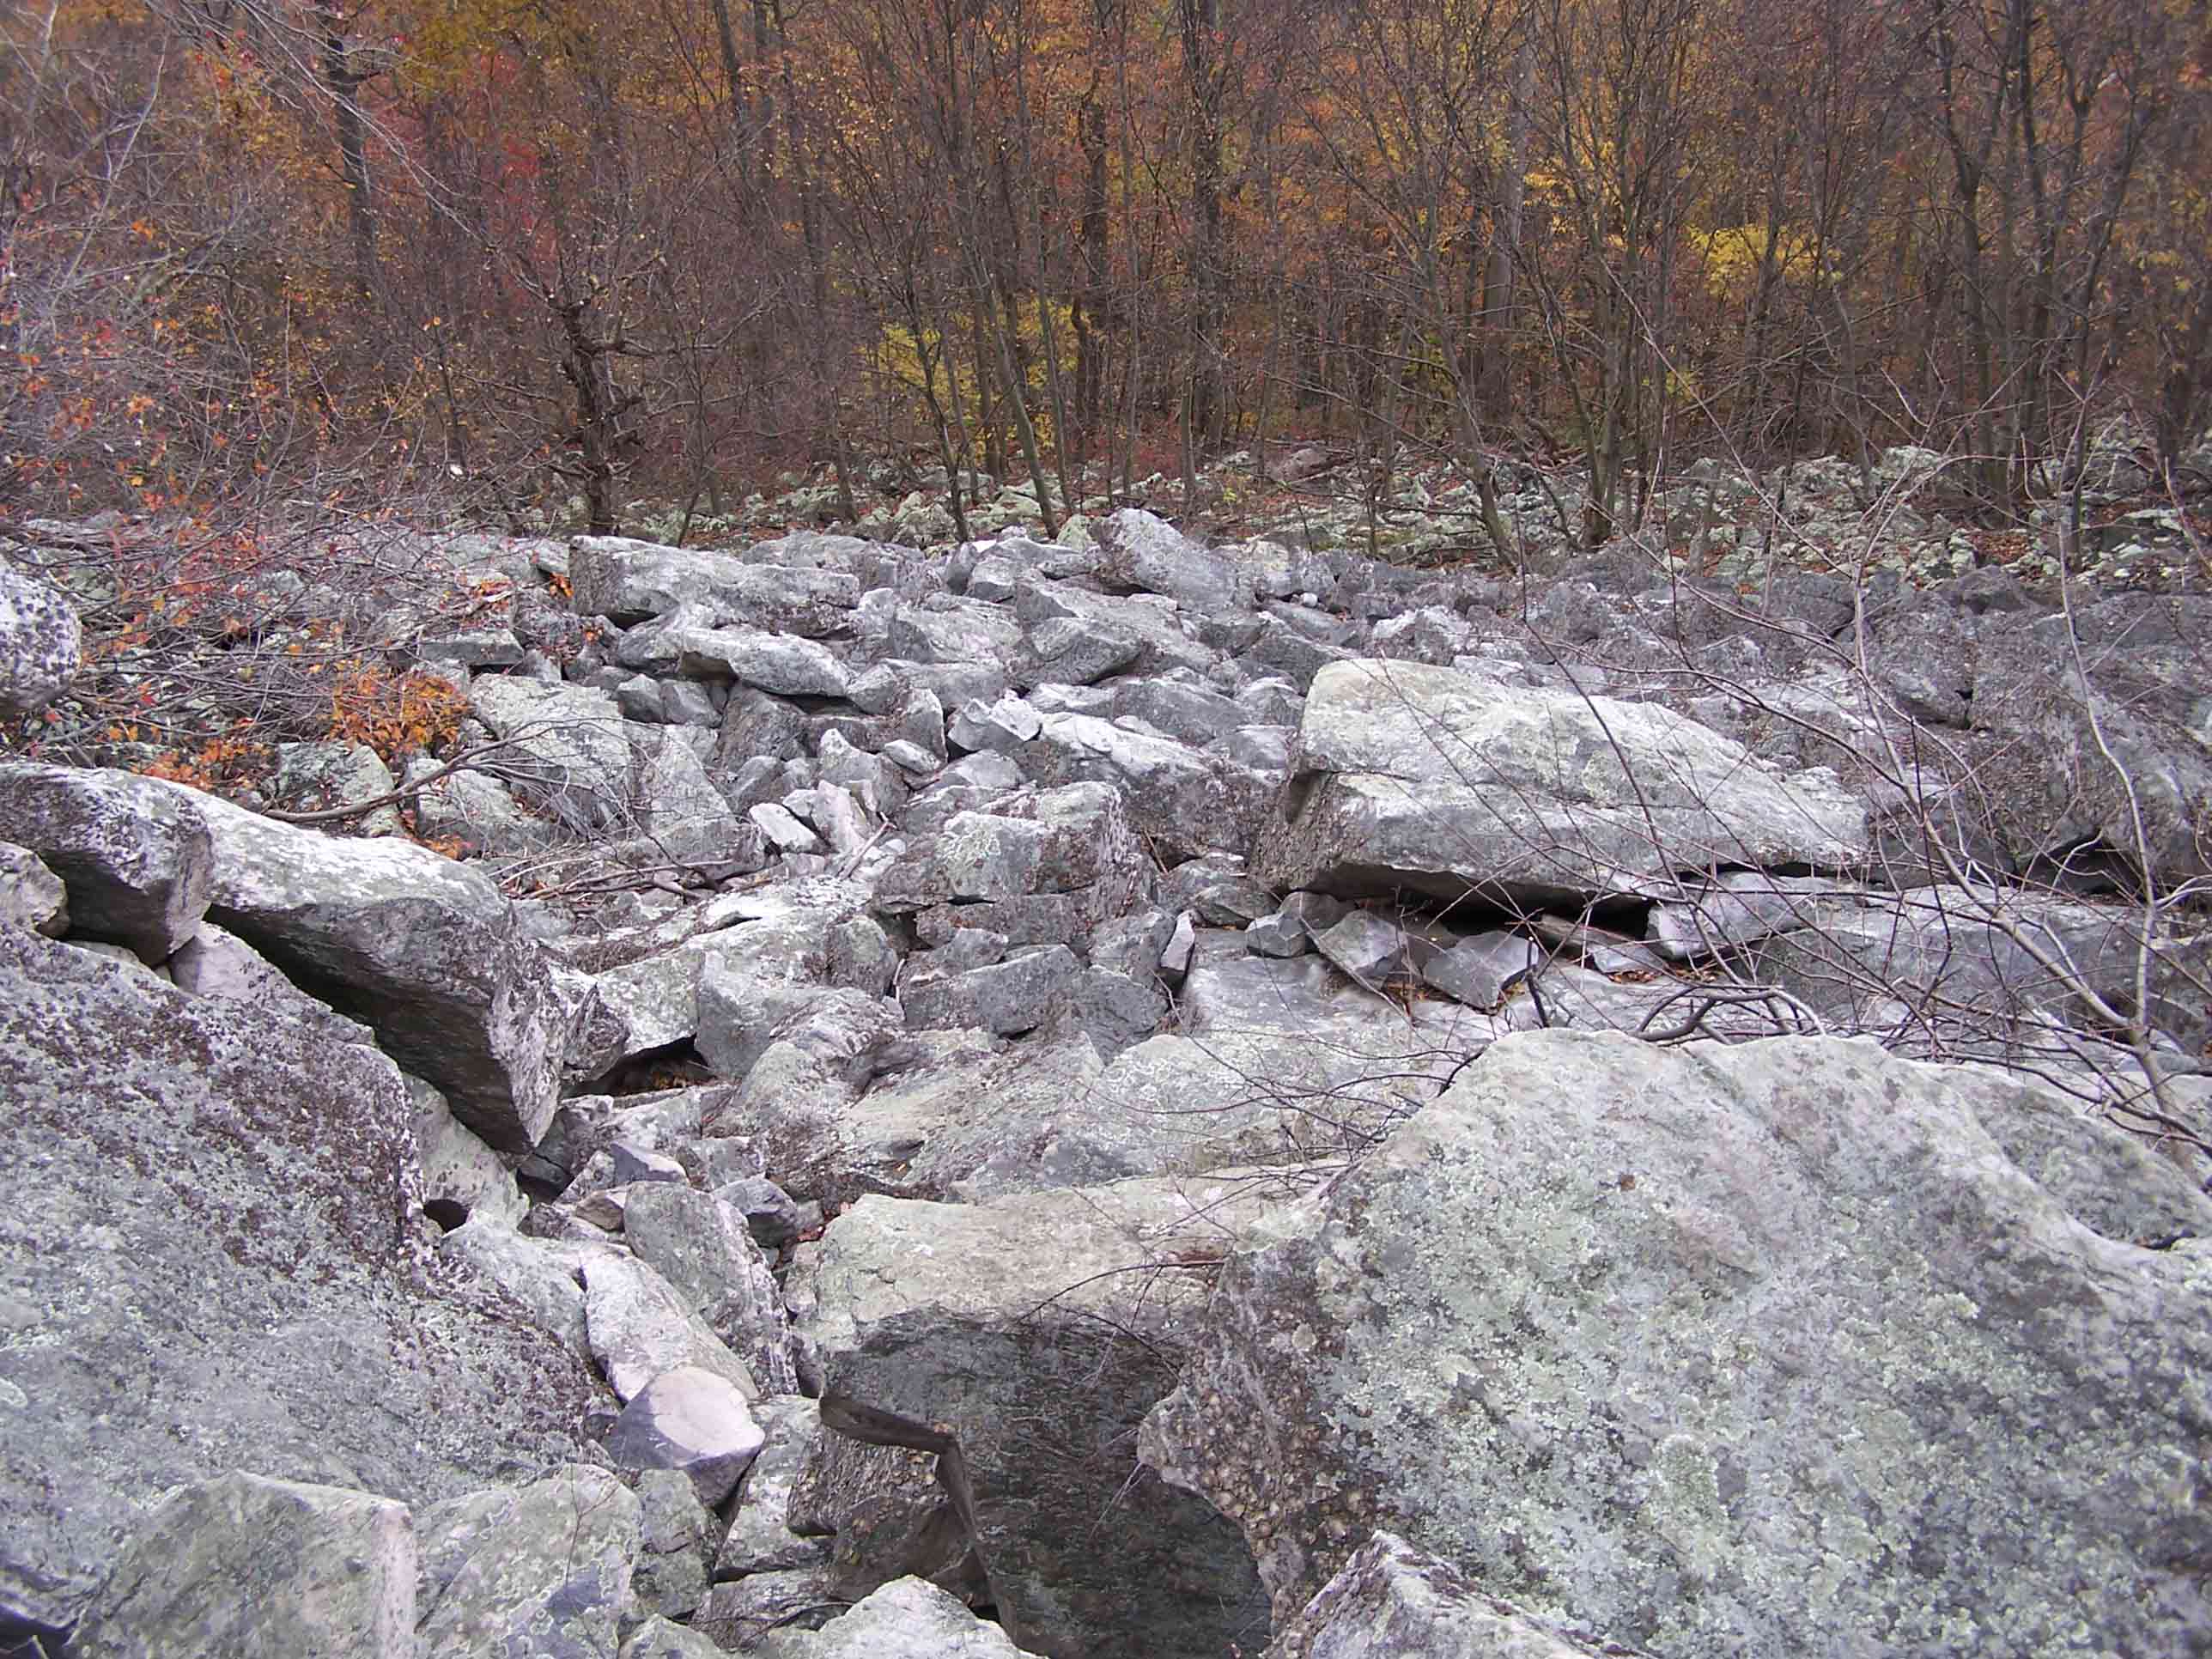 Talus slope about mm 2.4. Courtesy at@rohland.org